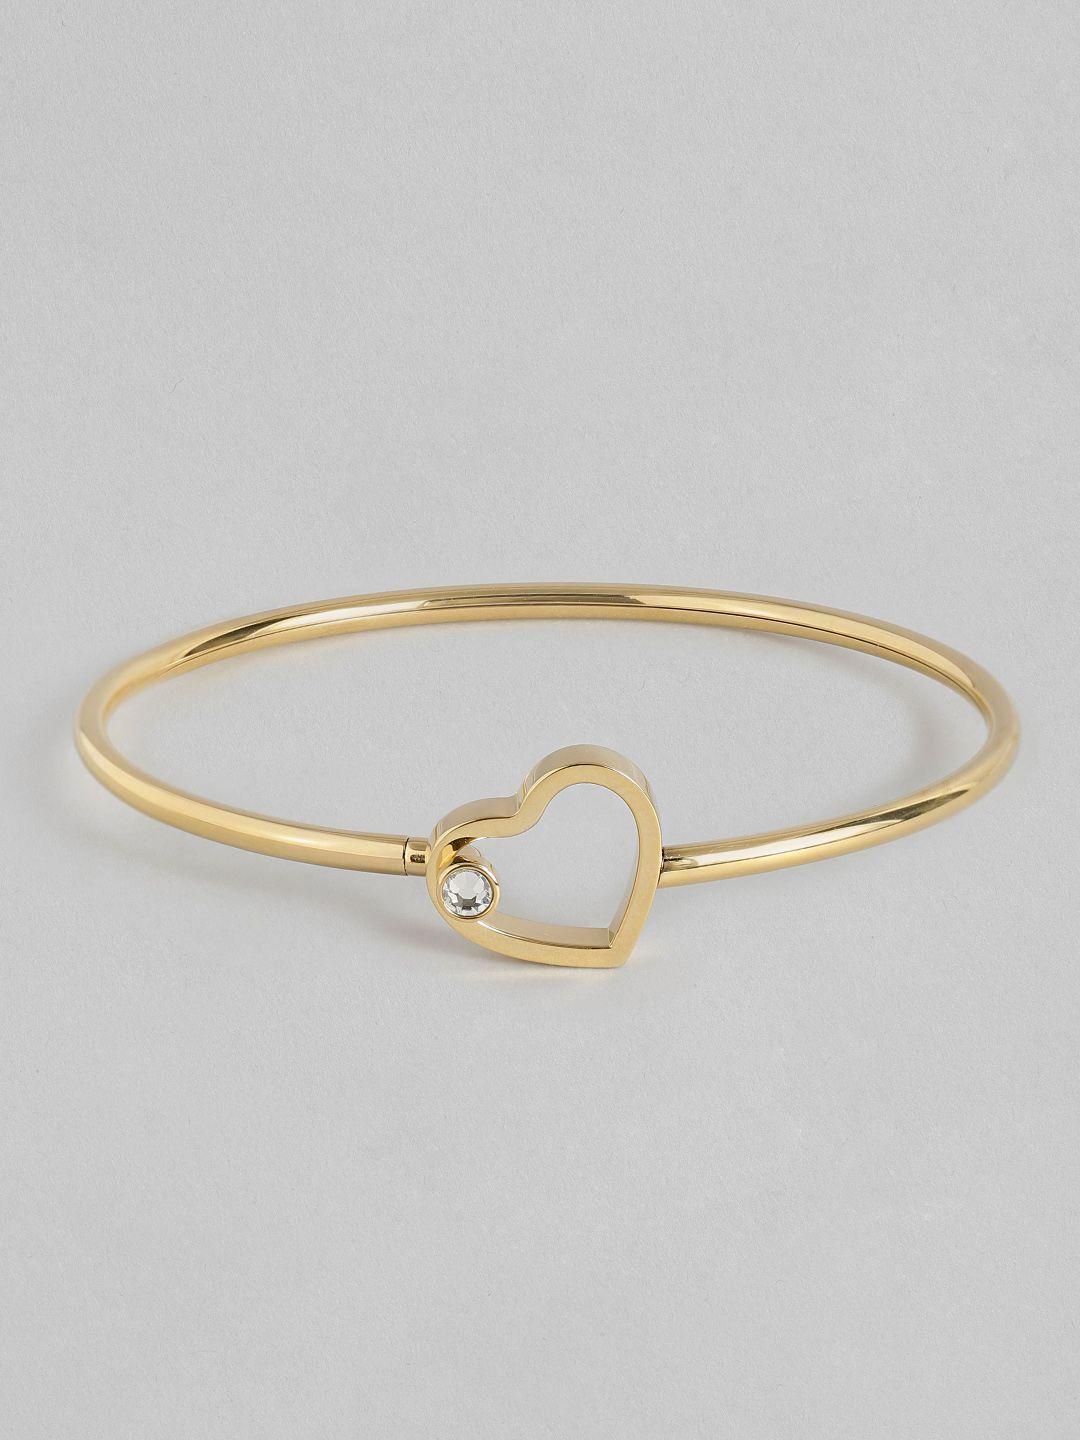 tommy-hilfiger-women-gold-plated-heart-shaped-stainless-steel-single-crystal-bangle